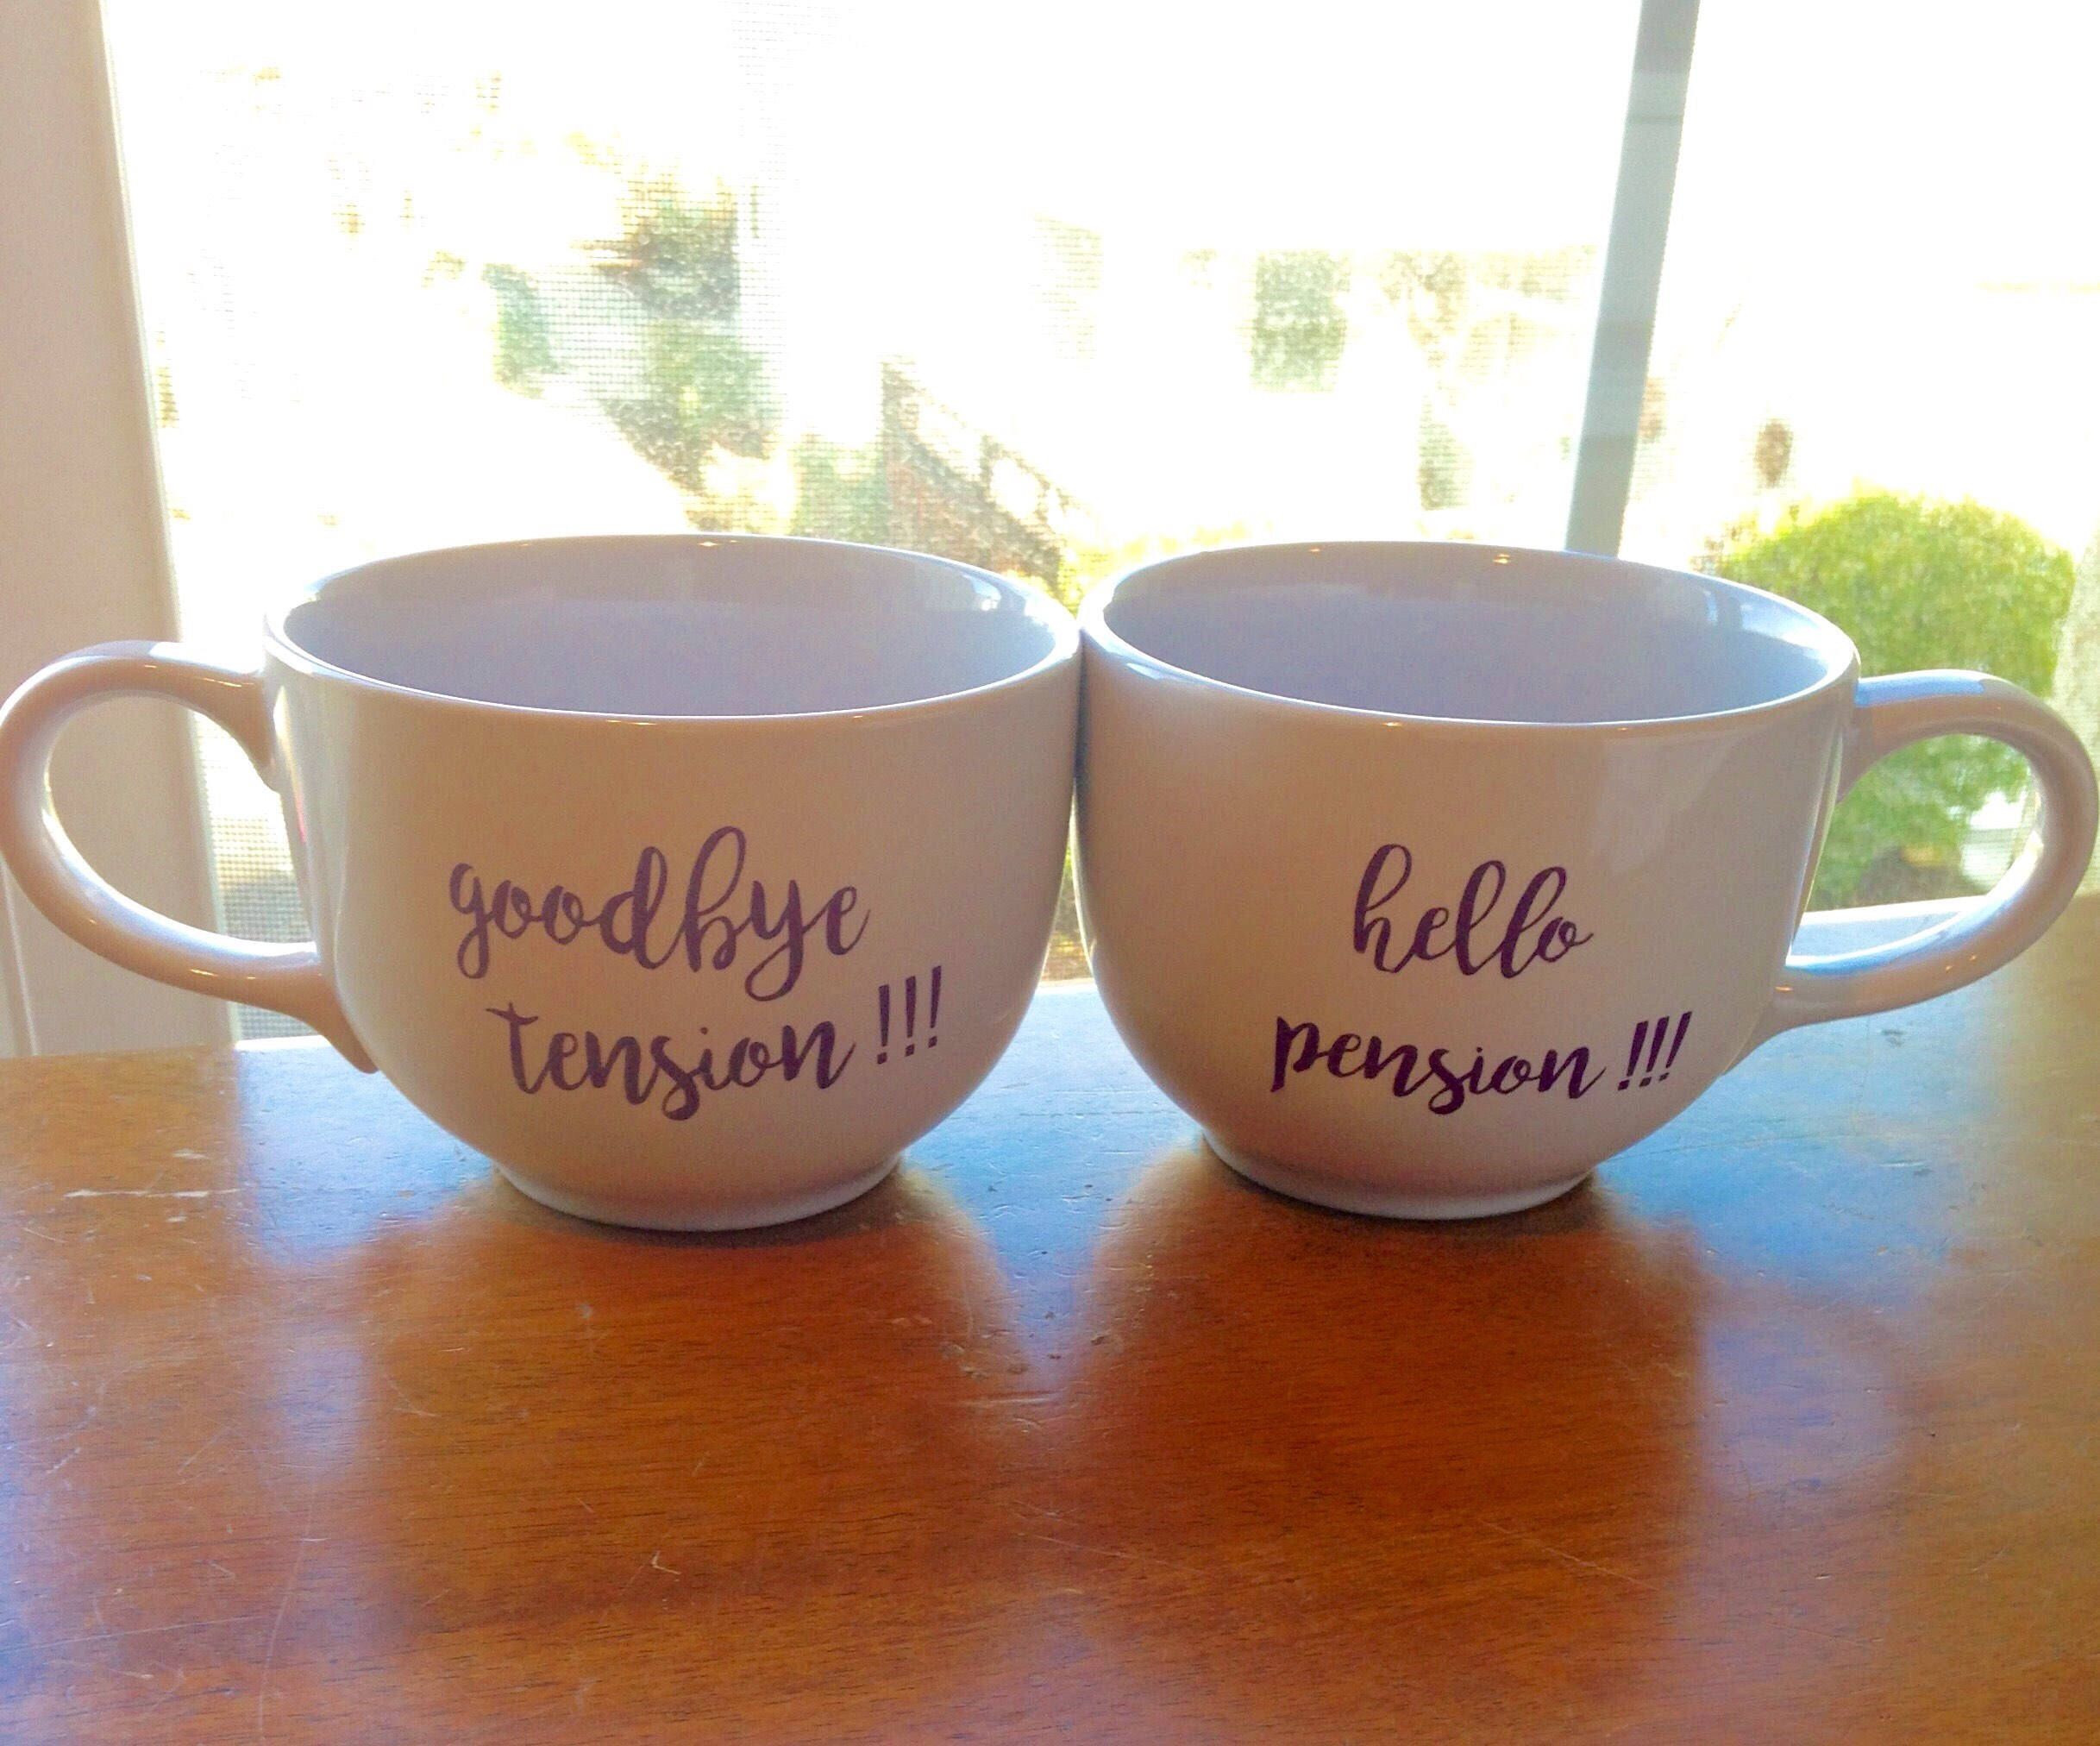 Retirement Gift Ideas For Couples
 A personal favorite from my Etsy shop